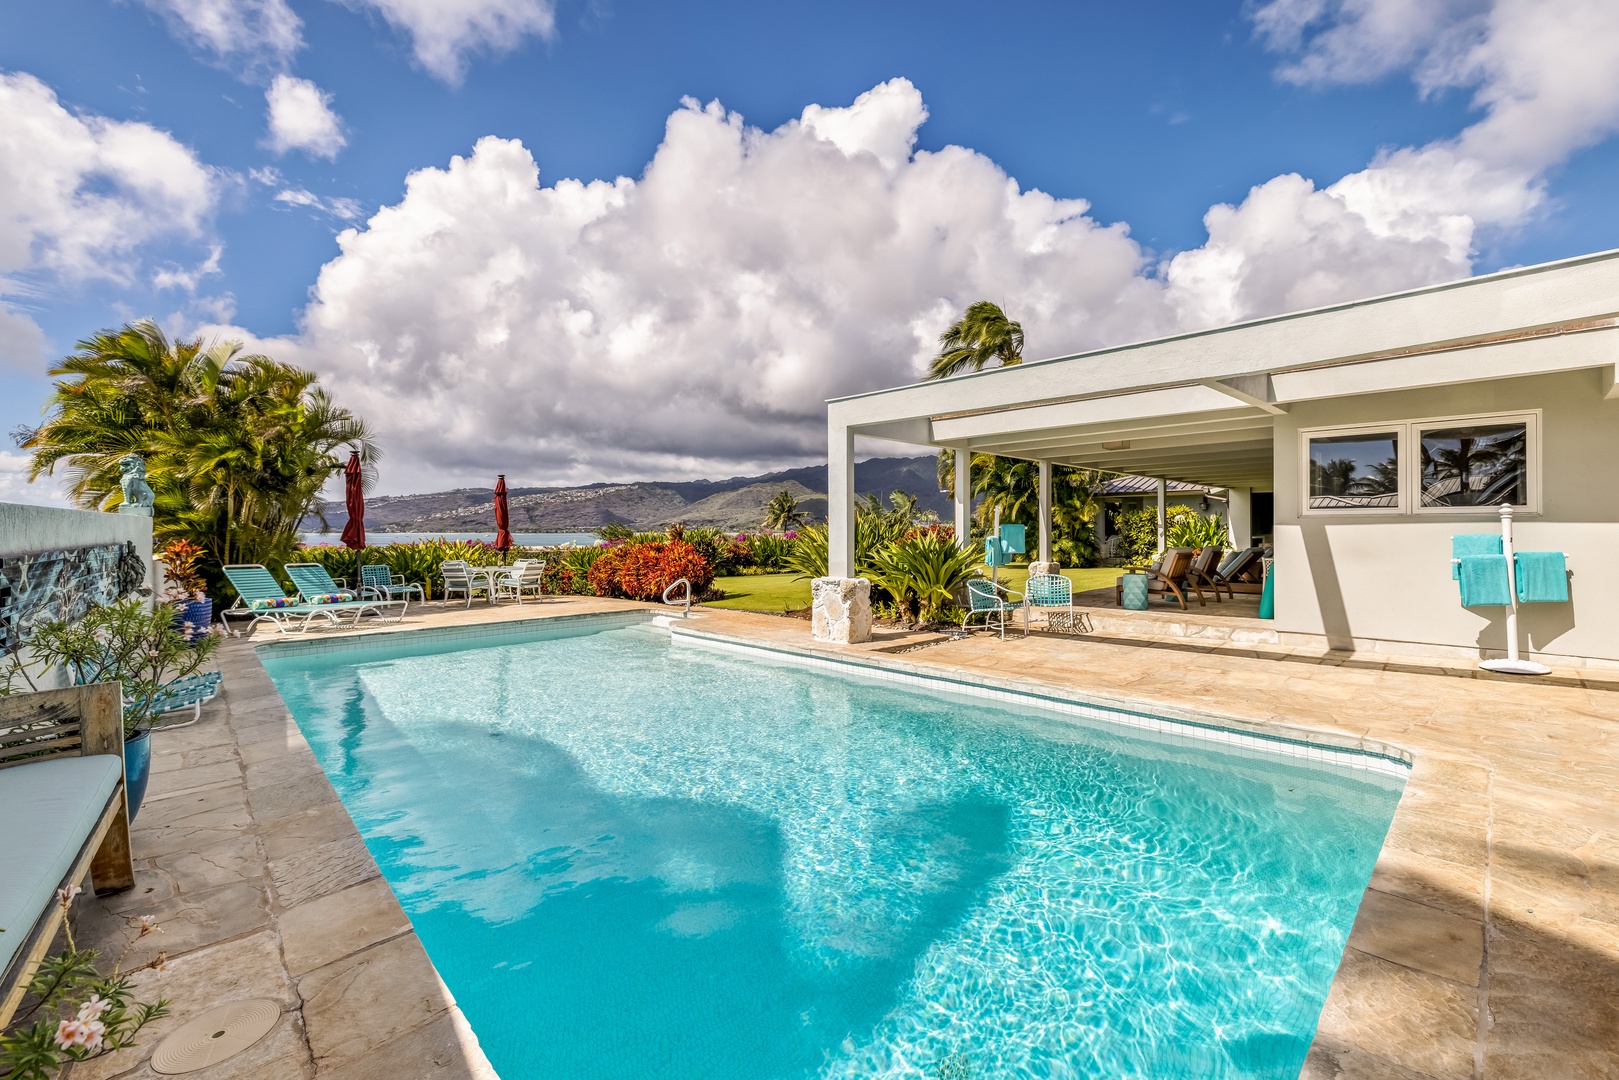 Honolulu Vacation Rentals, Hale Ola - Come and experience the beauty of Hale Ola by Gather, an exquisite secluded haven situated in the prestigious Portlock neighborhood